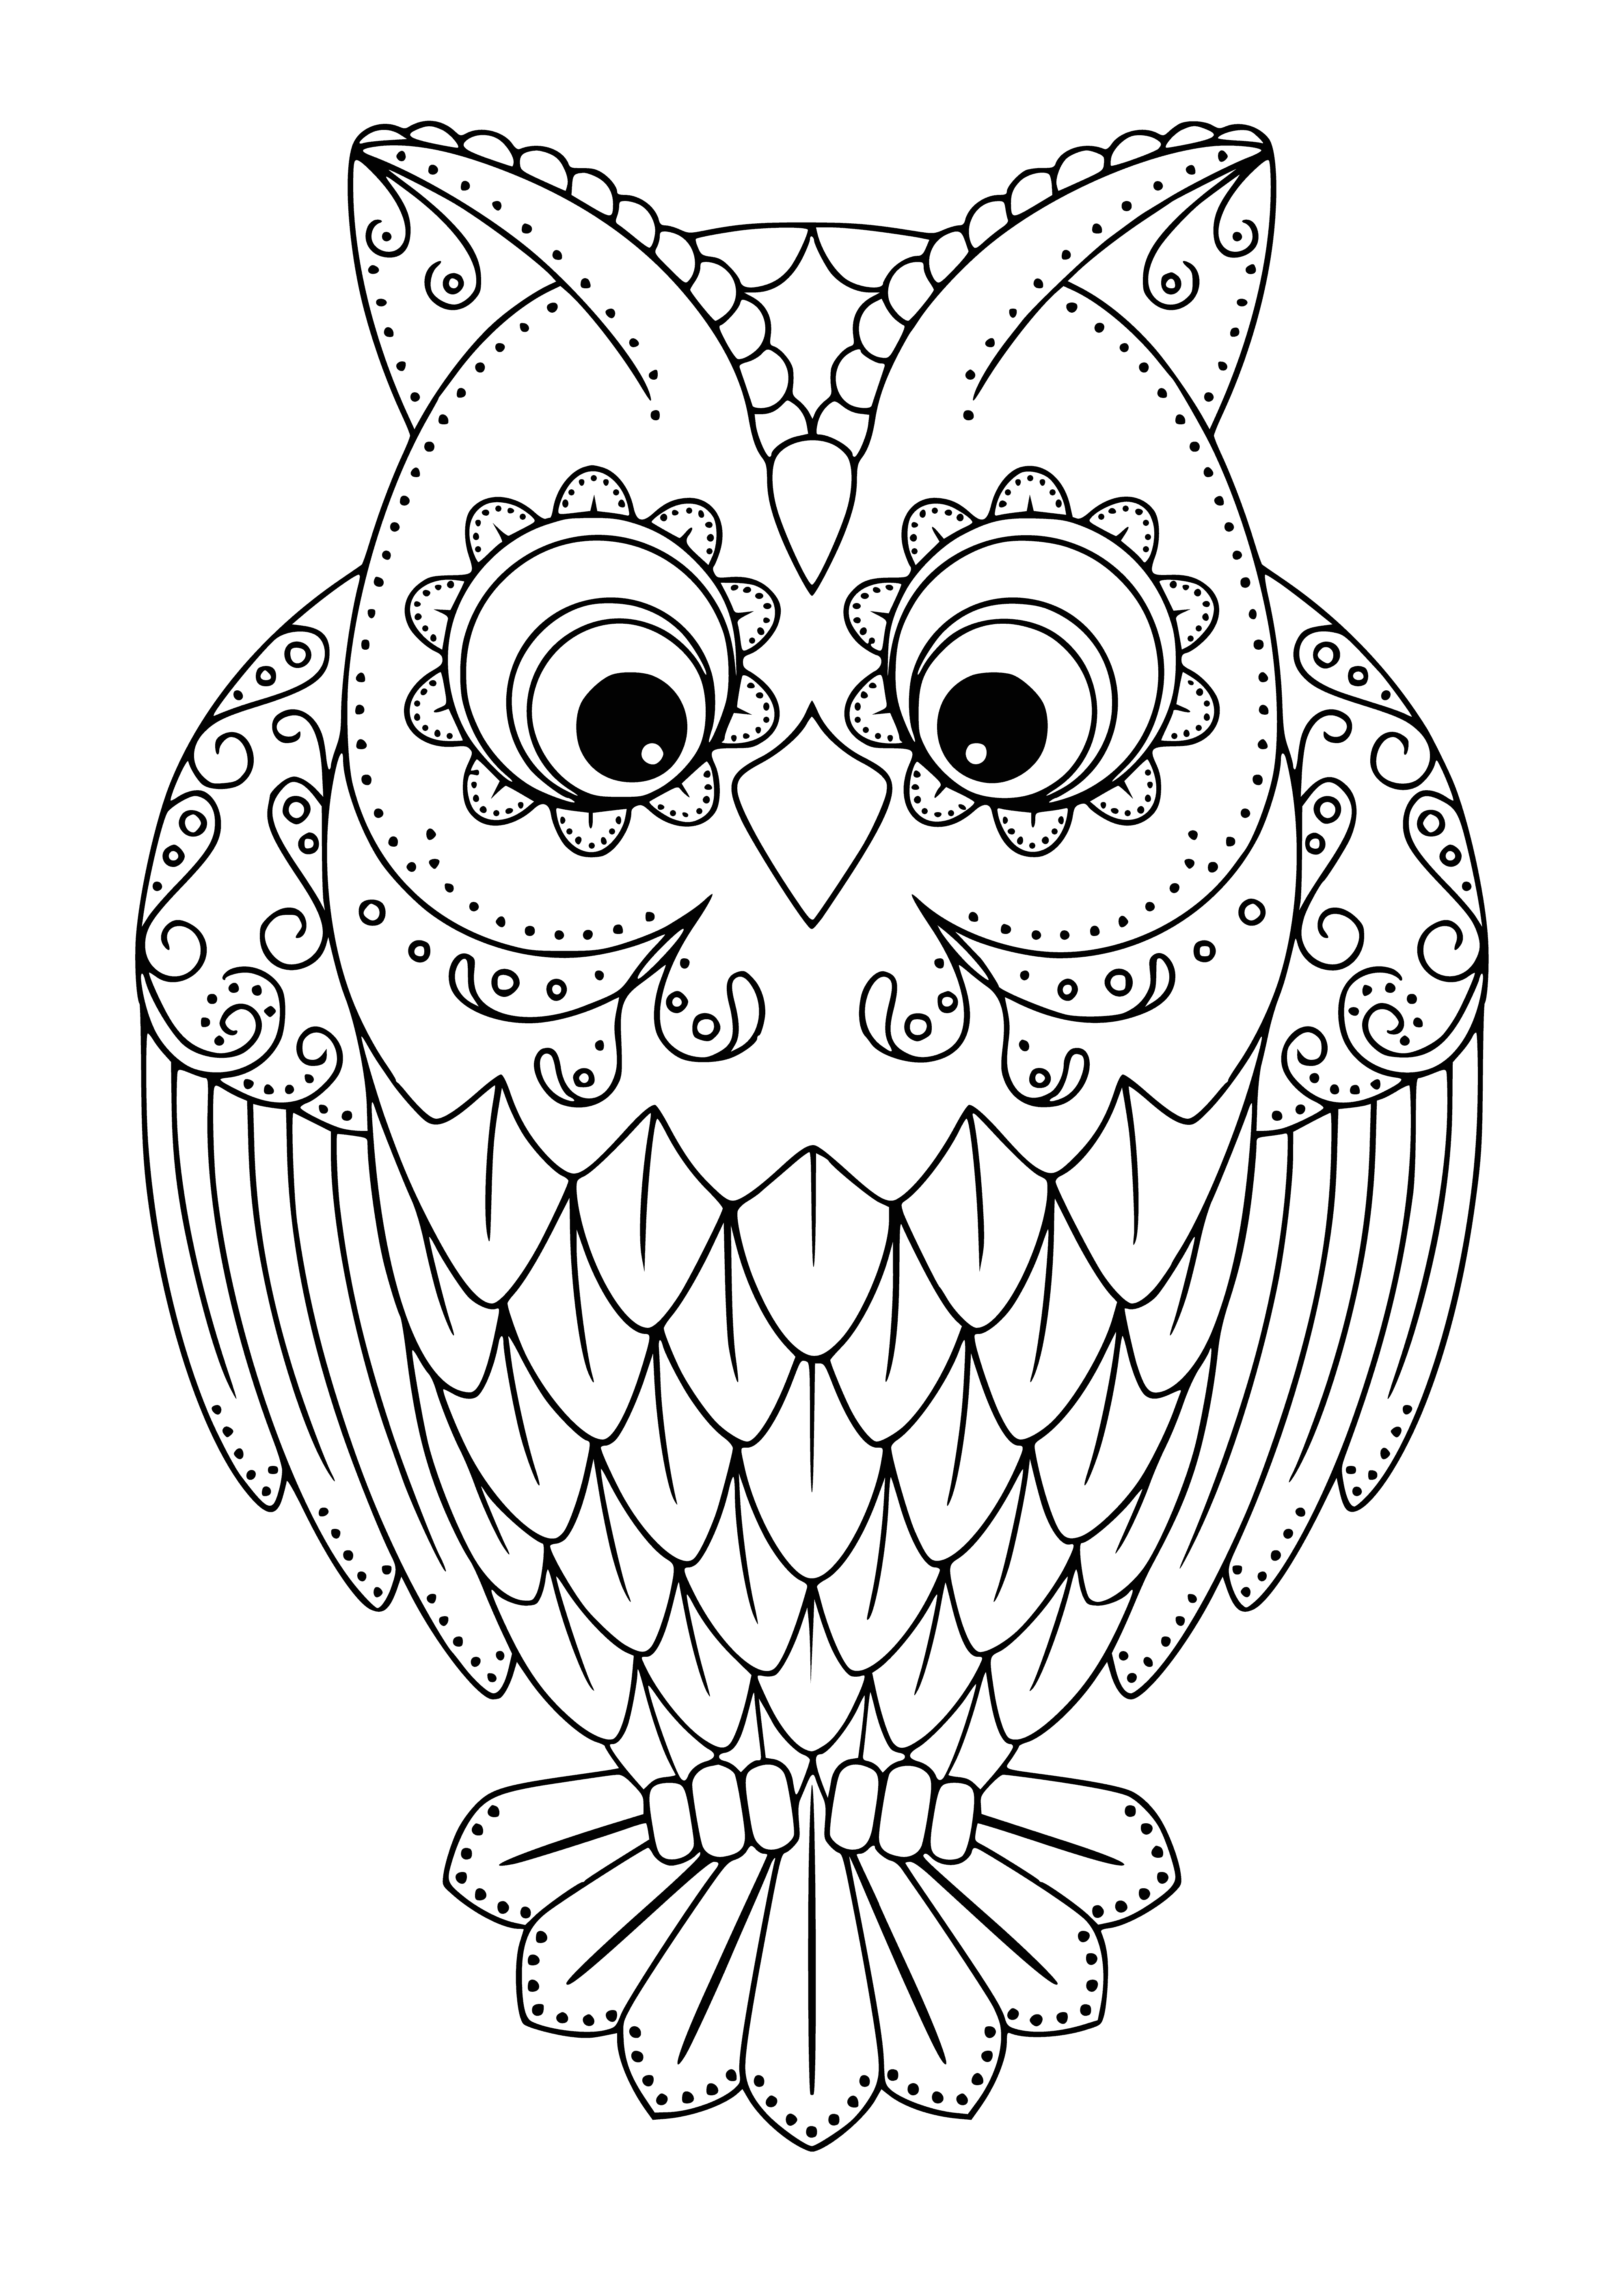 coloring page: Owl coloring page features an owl on a branch with yellow eyes, gray & white body and gray & brown wings. #coloringpage #owl